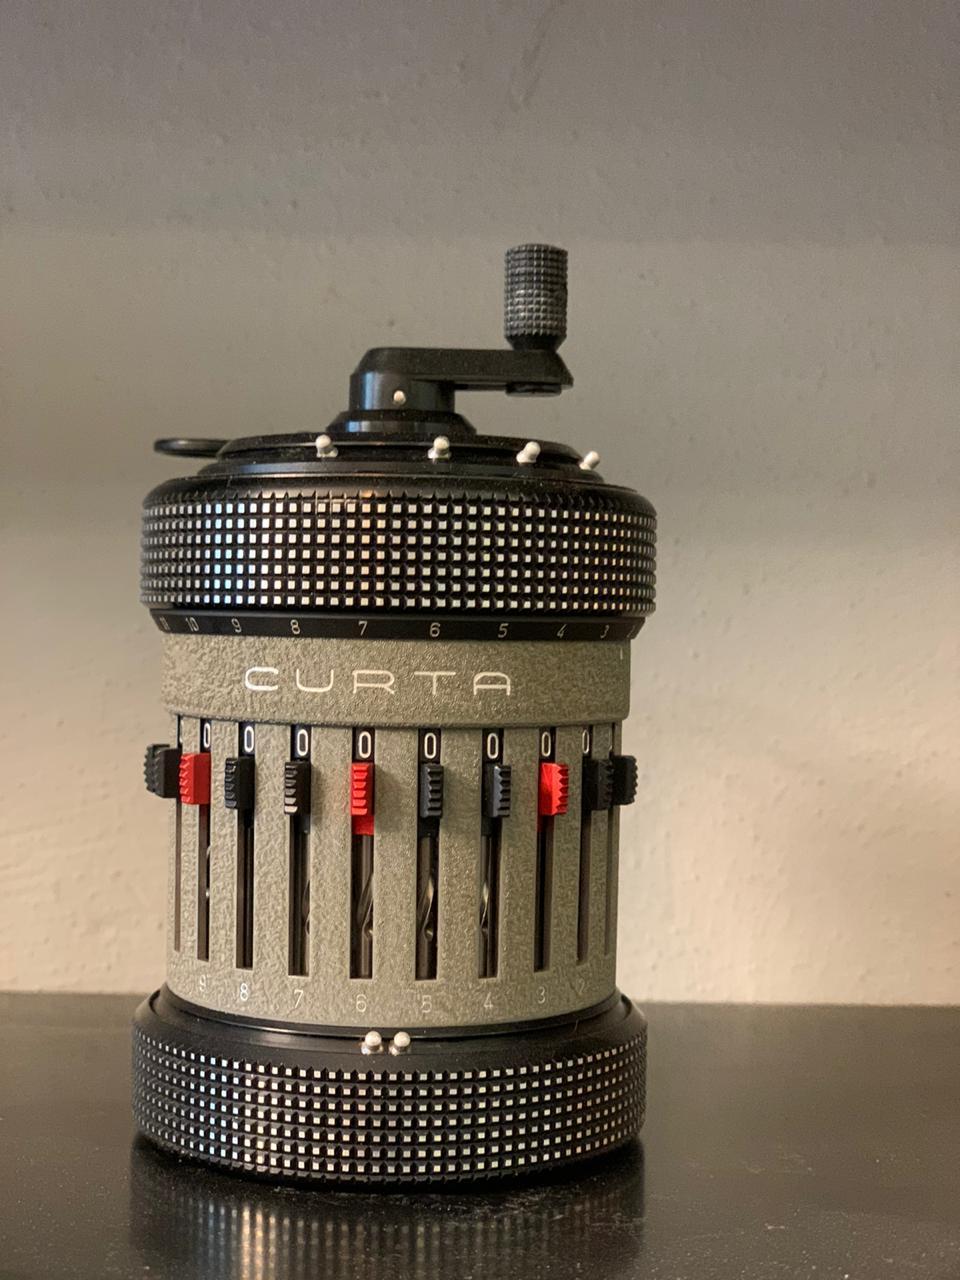 An important CURTA Type II mechanical calculator by Cortina Ltd. Mauren. Made in Liechtenstein, manufactured in September 1966. Serial number 537731. Light grey body with 11 digits for data entry, 8 for revolution counter and 15 for result counter.